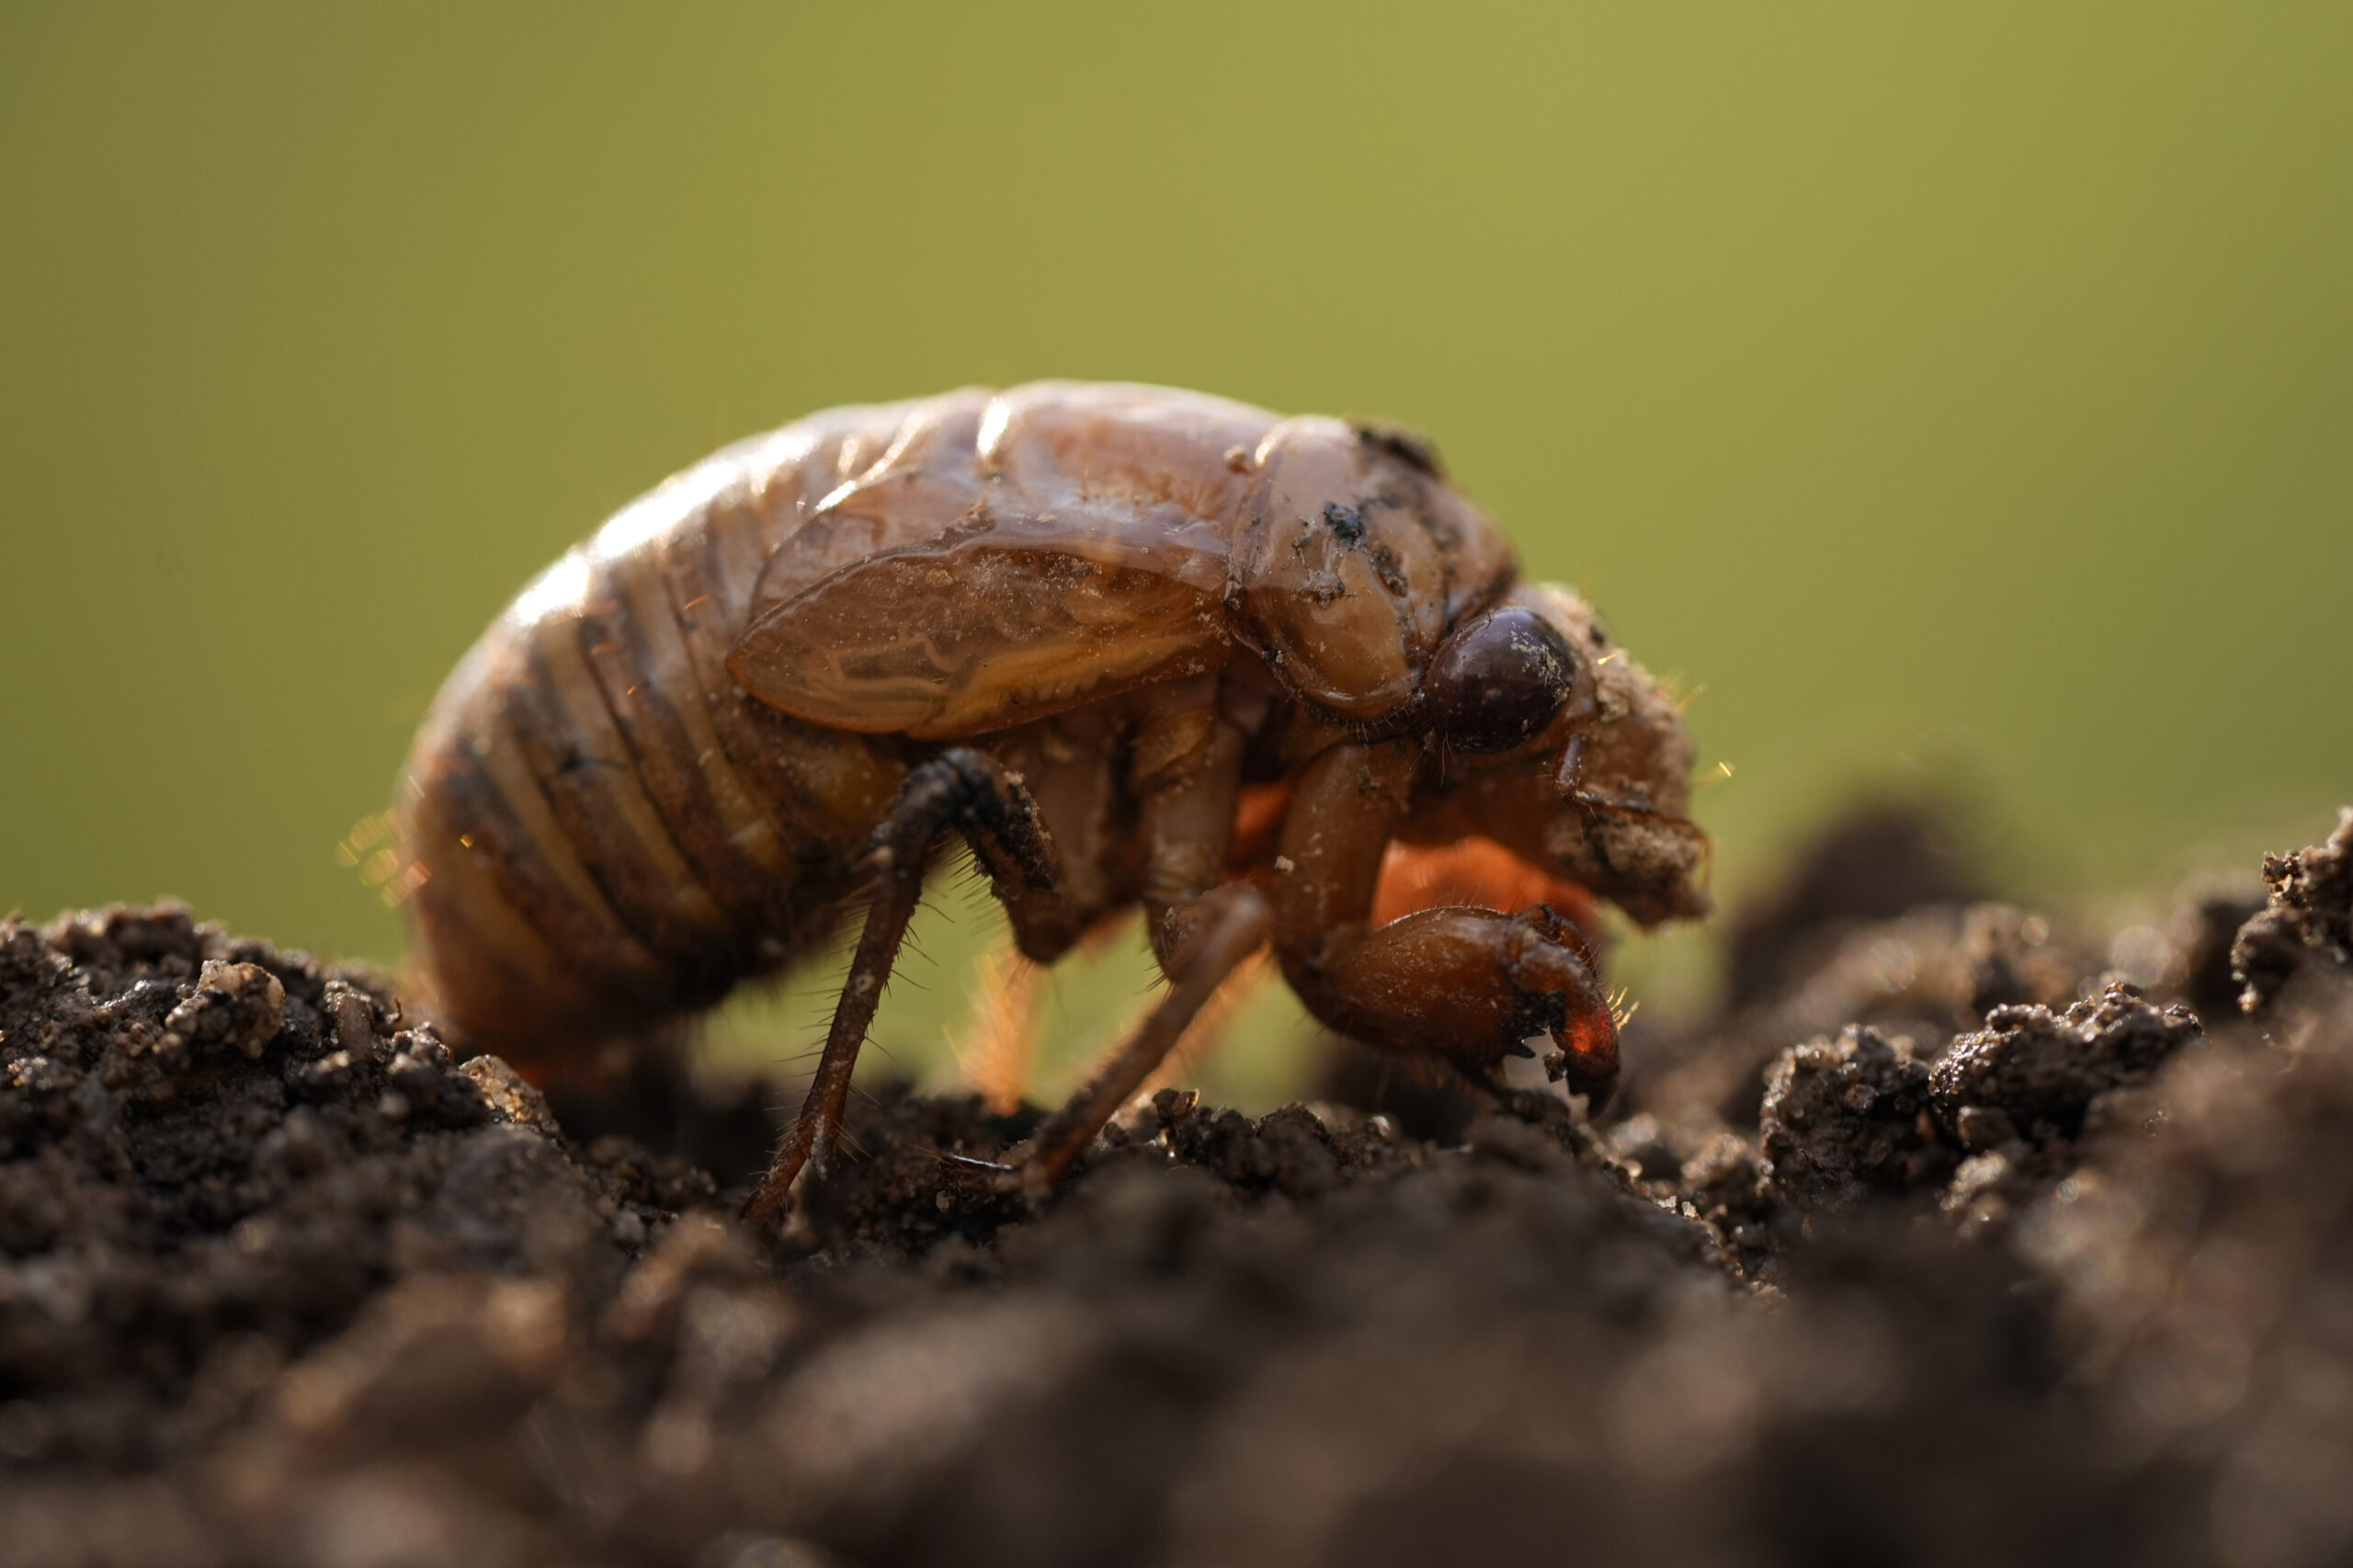 This year, Wisconsin will see convergence of cicada species that happens every 2 centuries